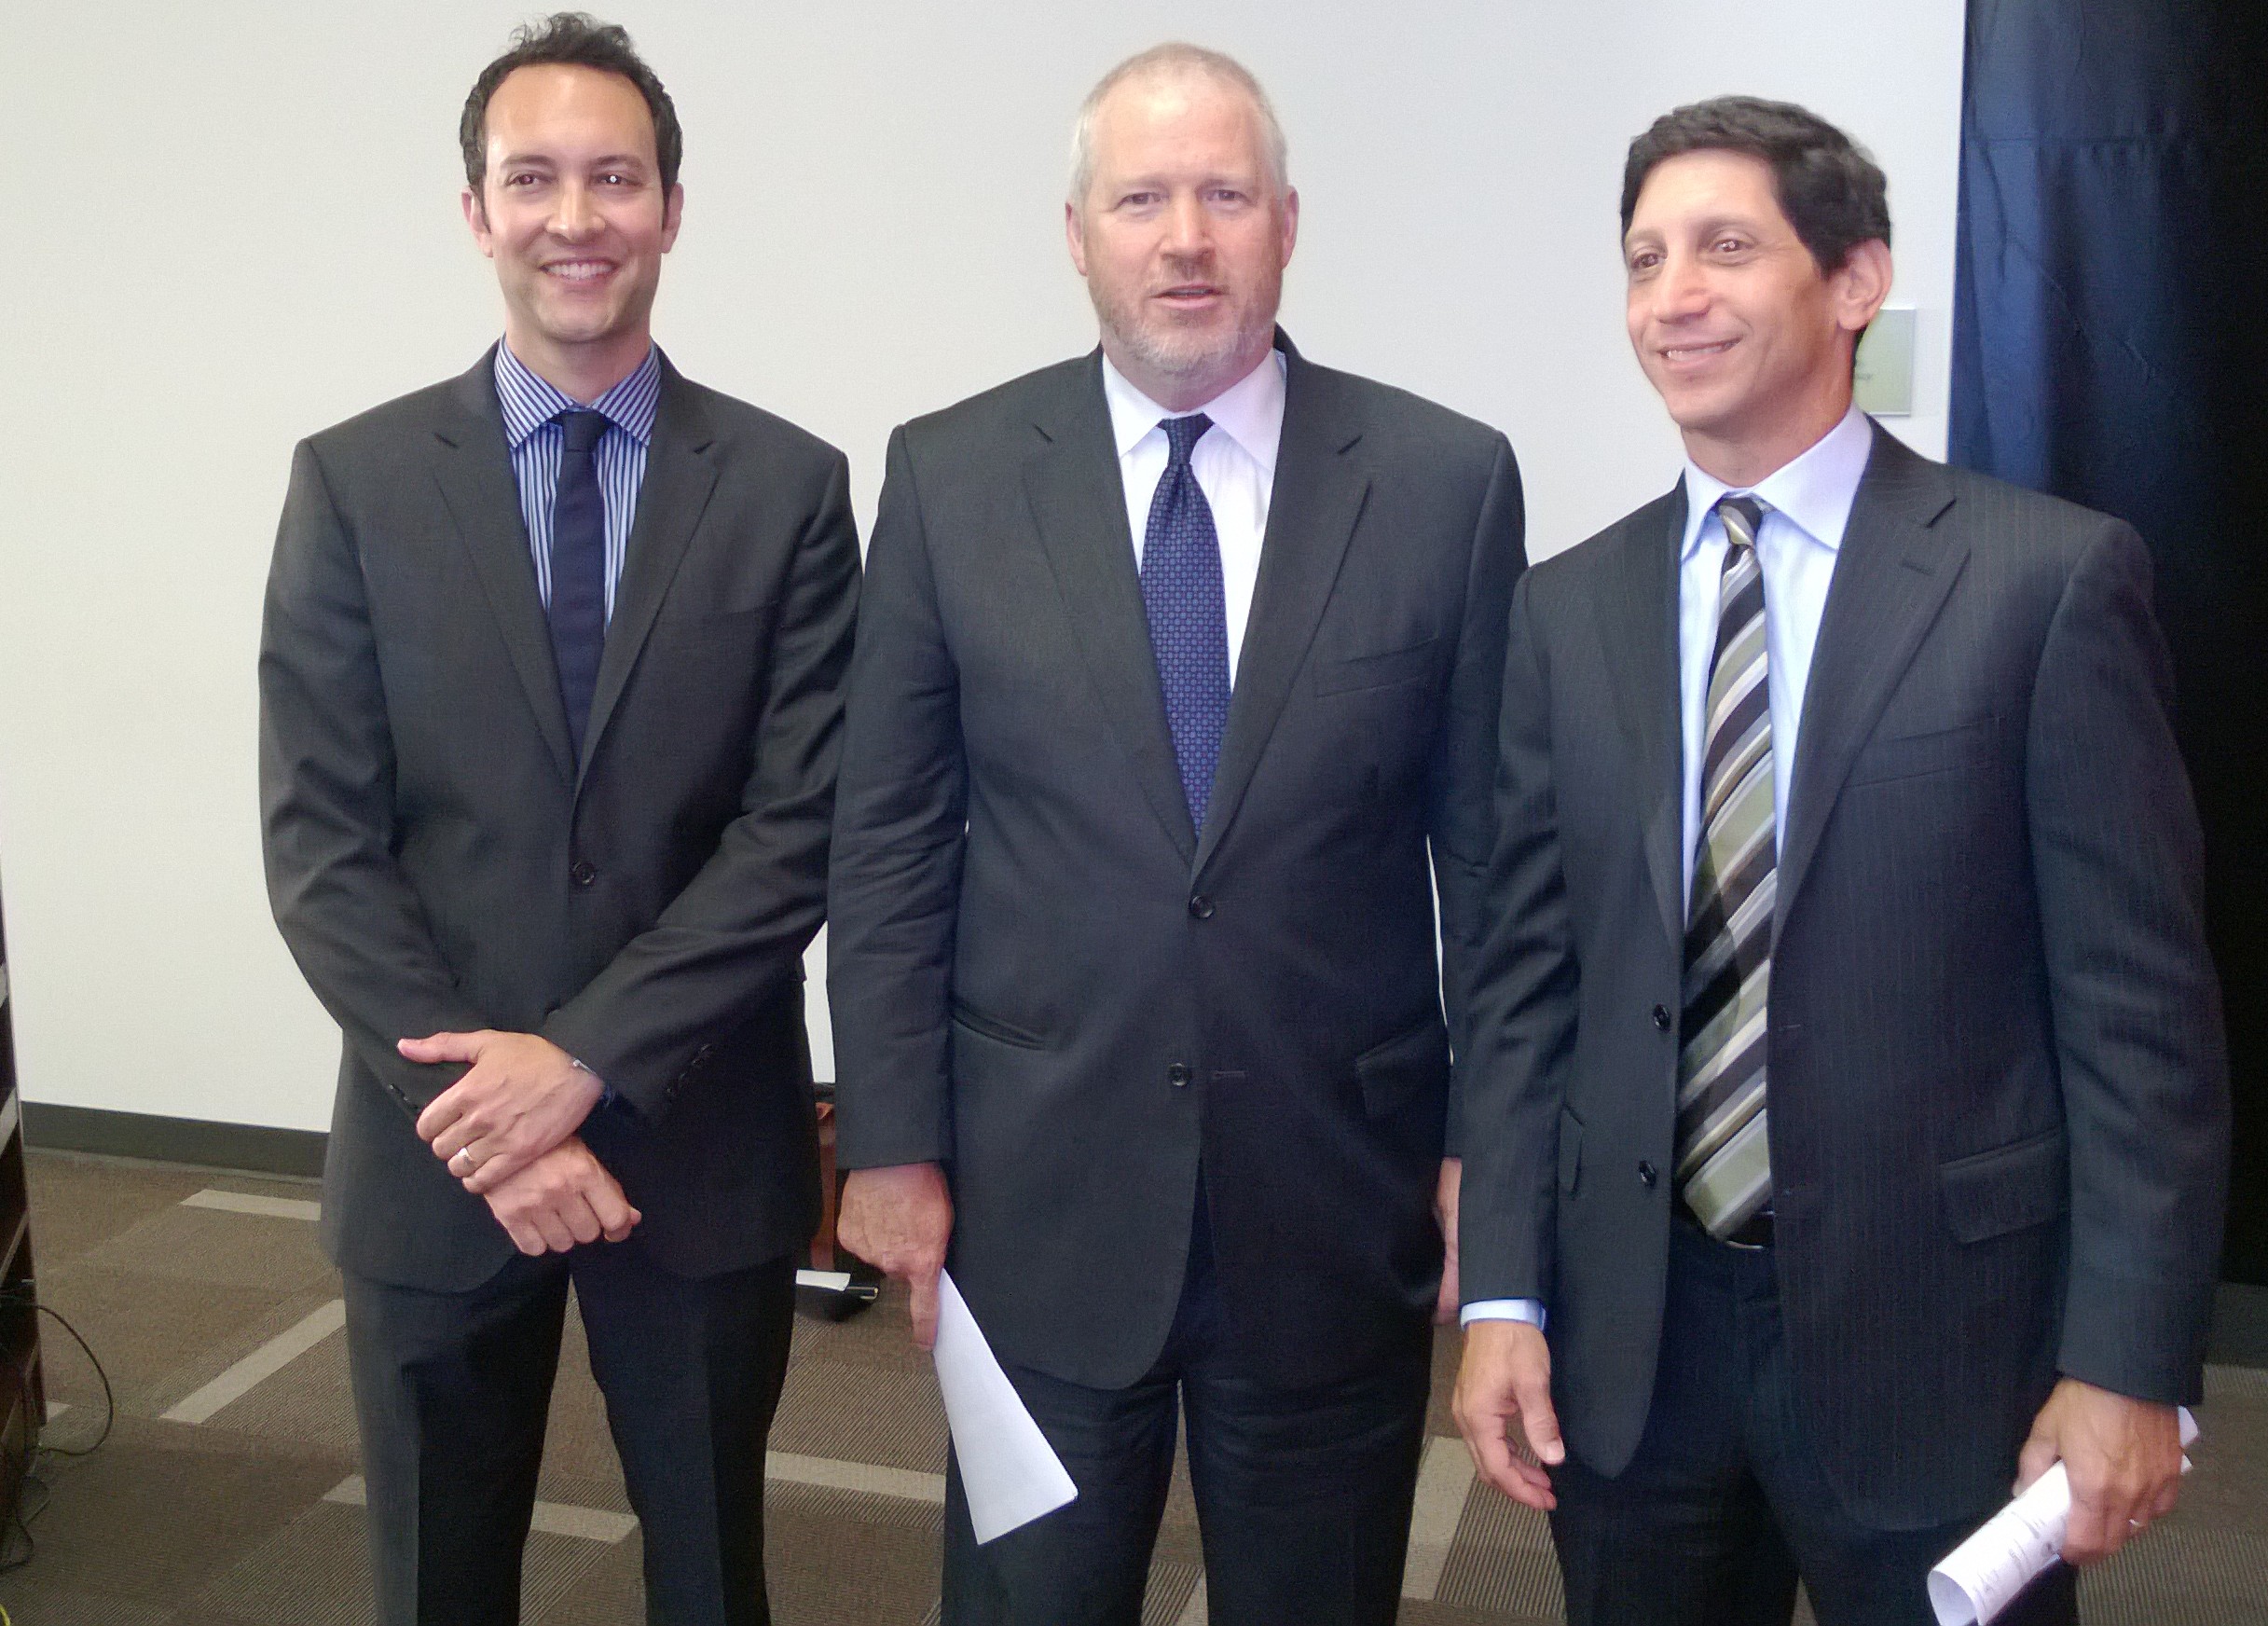  Today at the UW School of Medicine: (From left) Brian Geller, Executive Director, Seattle 2030 District, Seattle Mayor Mike McGinn, Microsoft Chief Sustainability Officer Rob Bernard